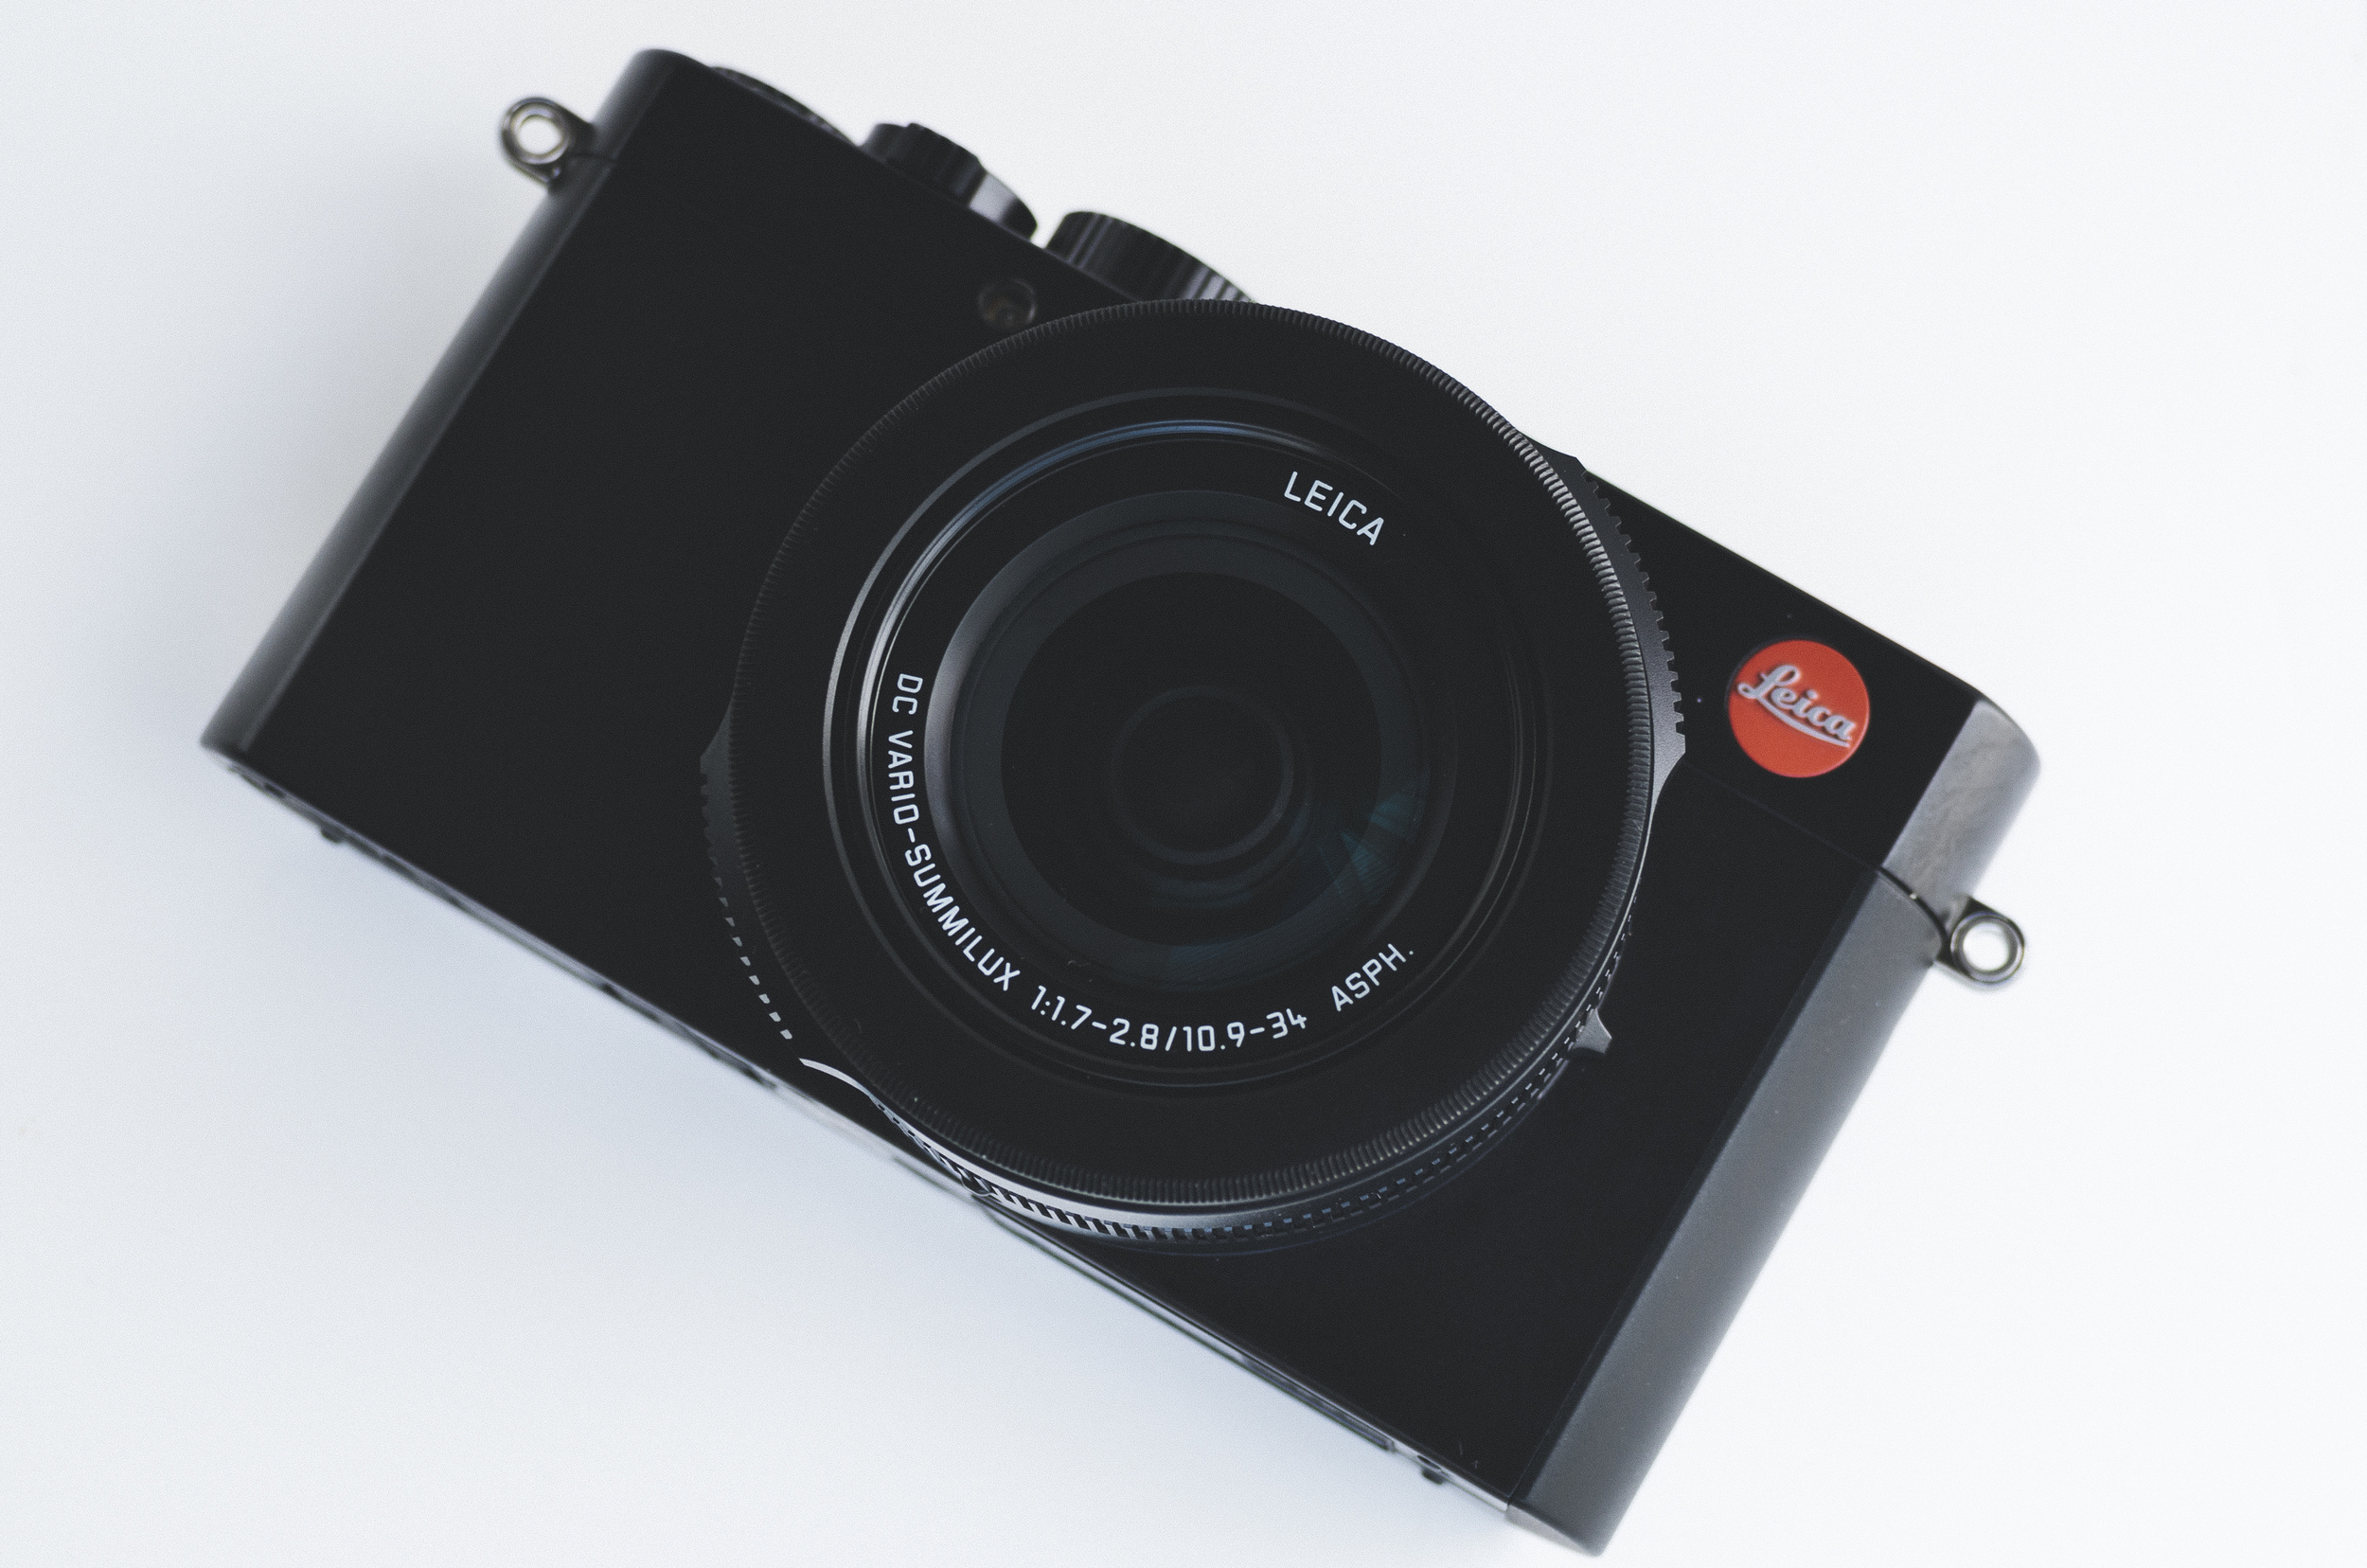 New Leica D-LUX: Compact Camera Features a Fast Leica DC Vario